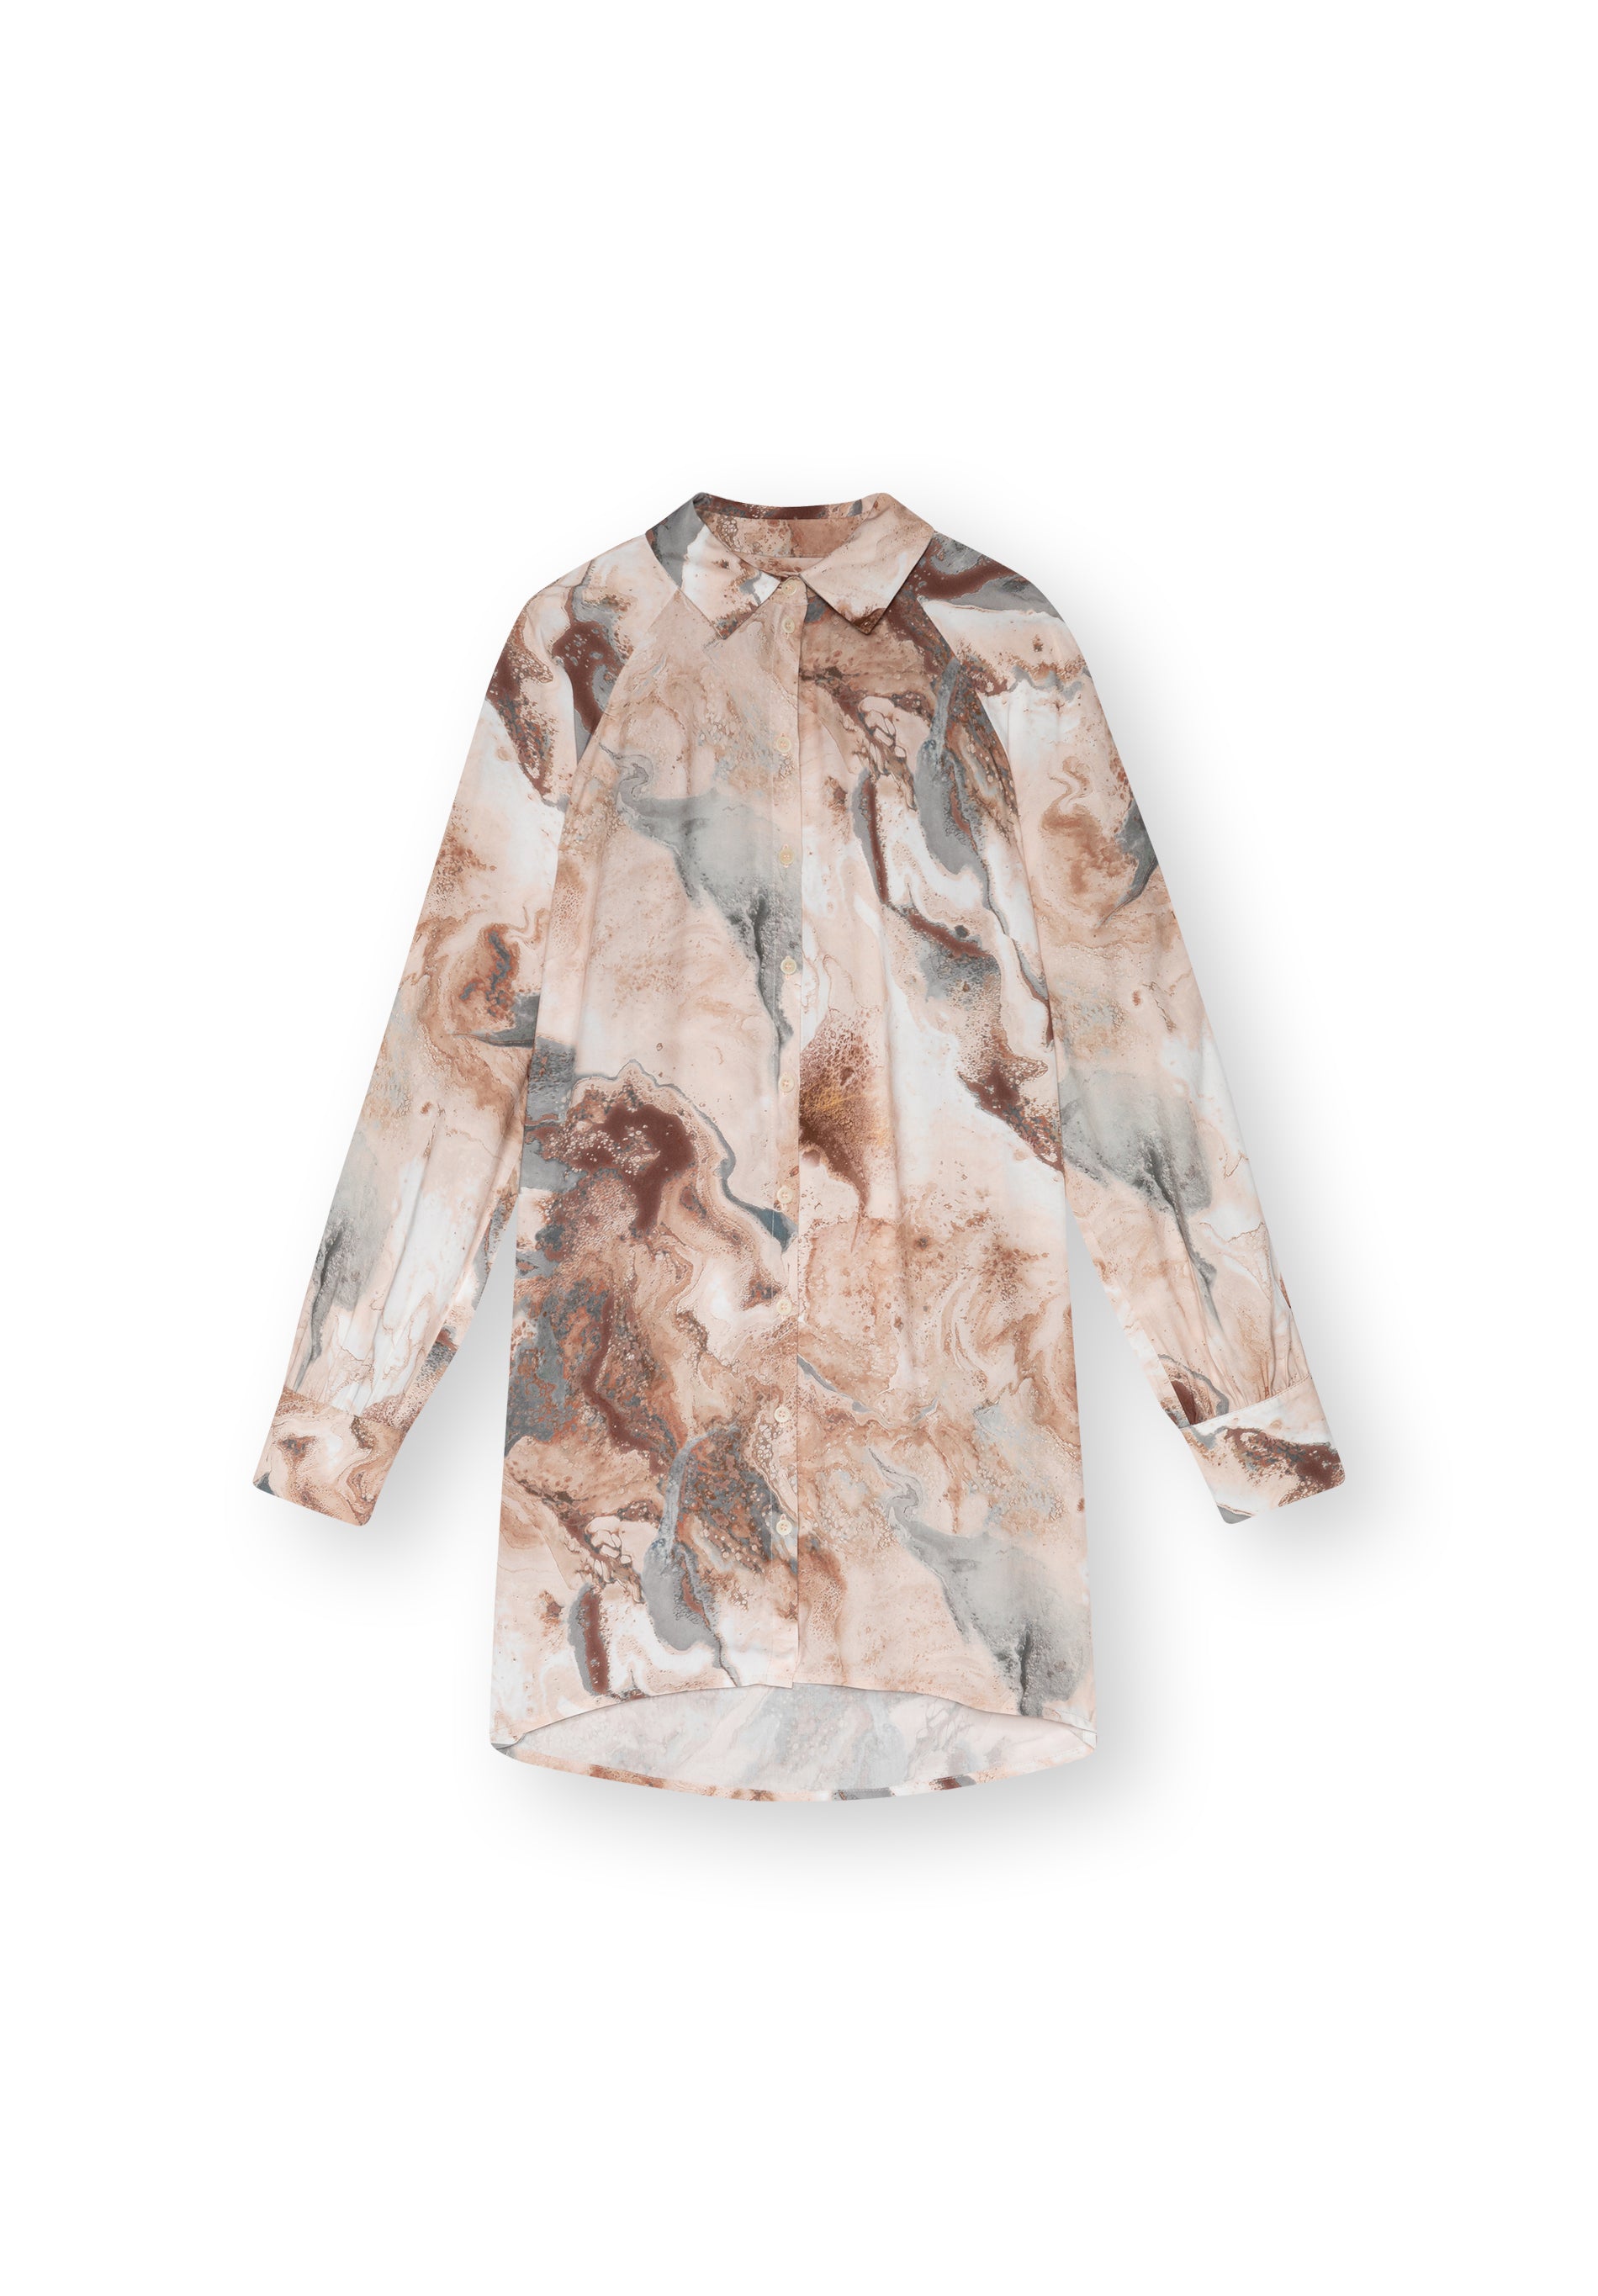 Long blouse TAPIRA in a light marble pattern by LOVJOI made from ECOVERO™